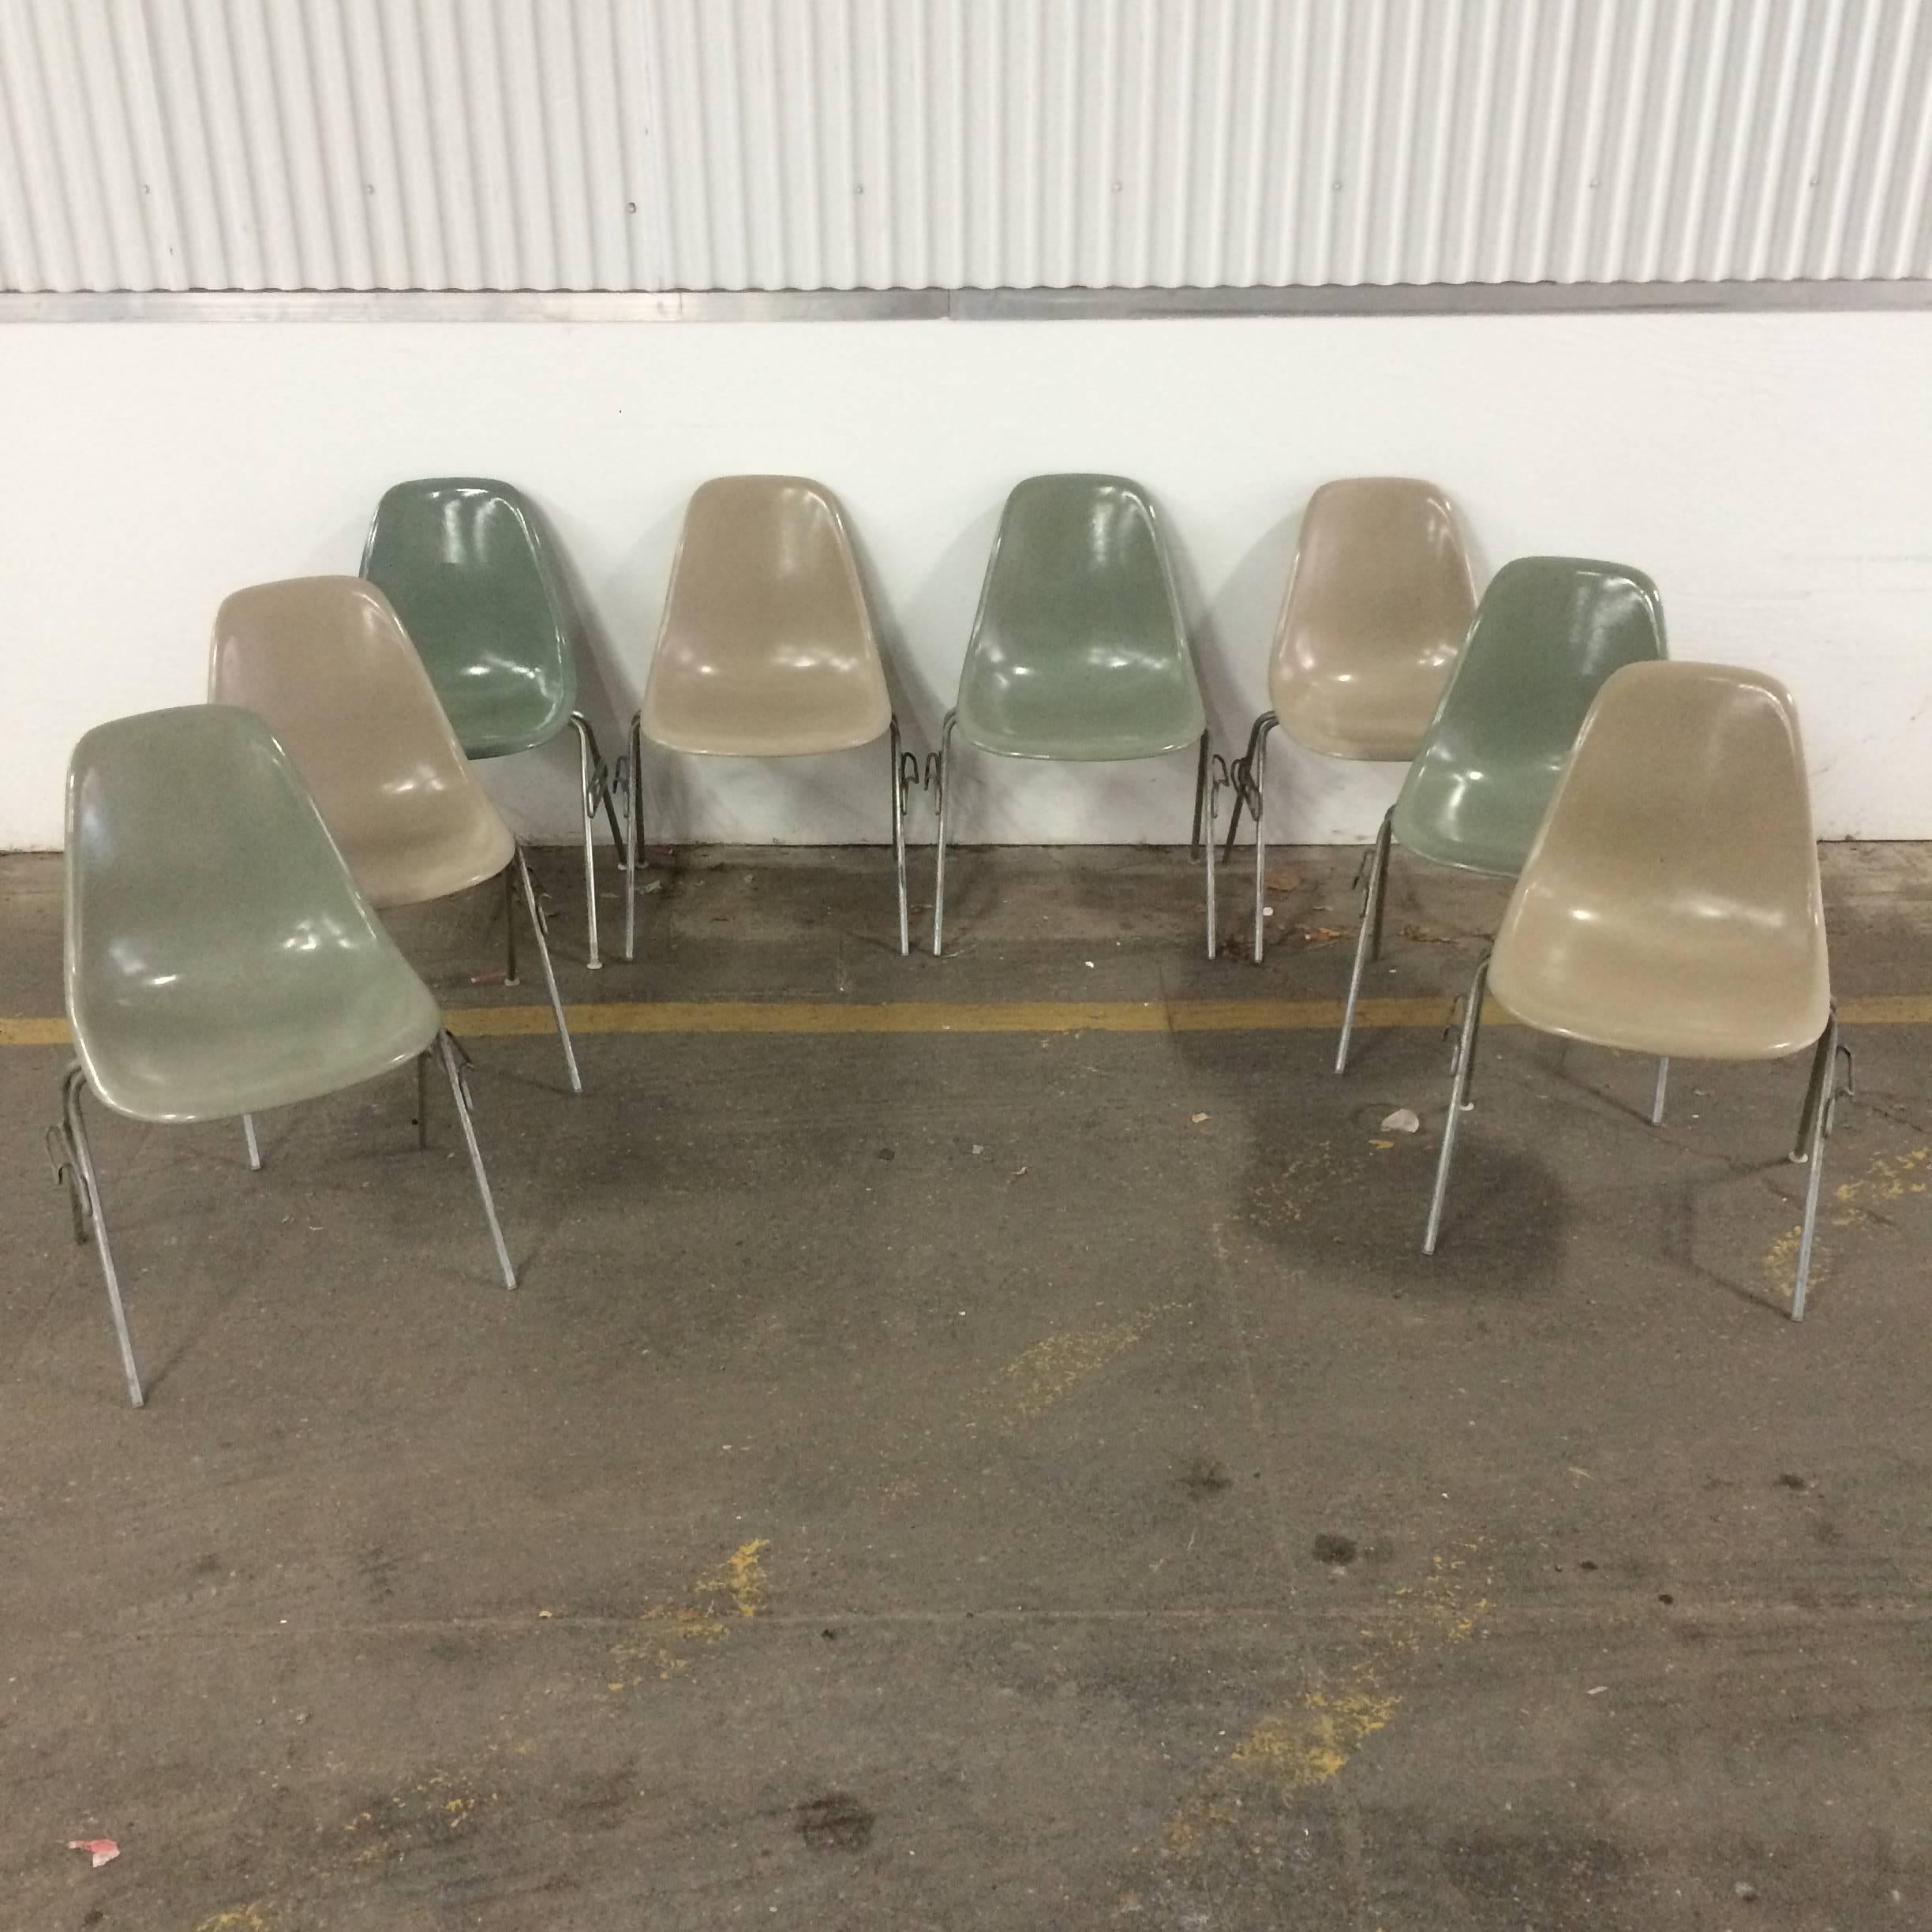 Spectacular set of eight Herman Miller Eames DSS stackable dining chairs in seafoam green and greige. Larger set available upon request. All shells in very good vintage condition with no fading, cracks, dings, holes, or anything besides normal